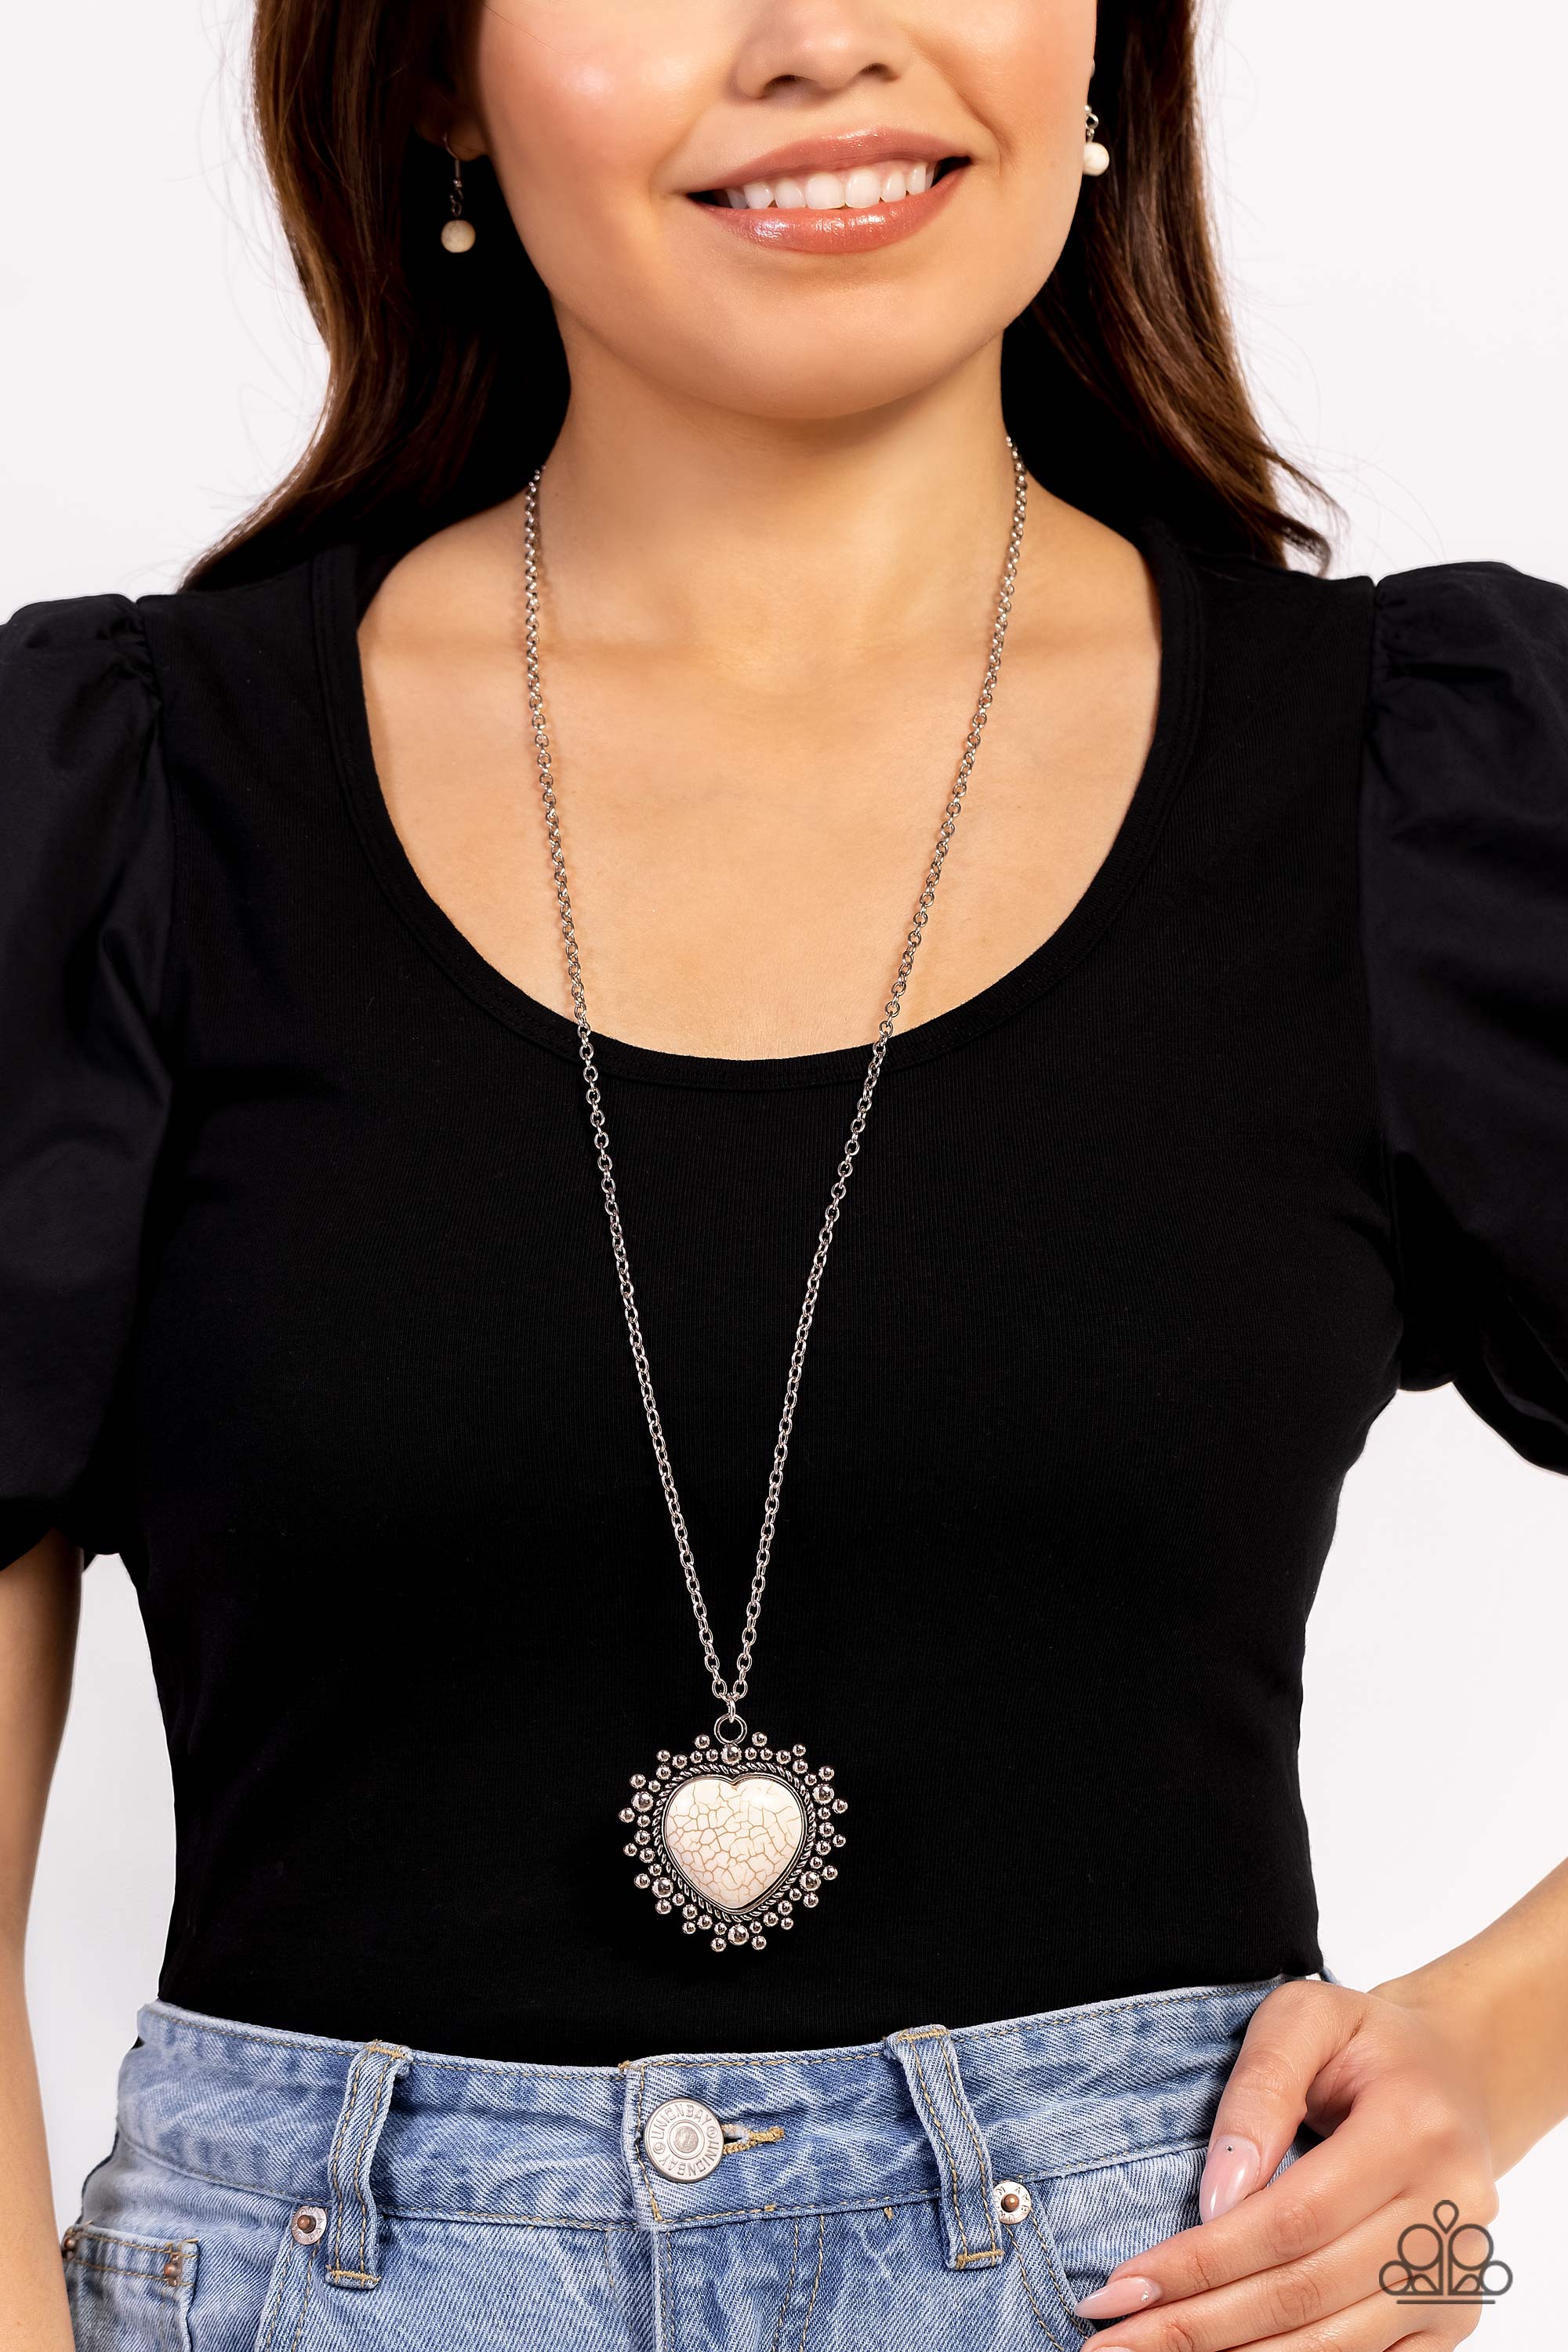 Southwestern Sentiment White Stone Heart Necklace - Paparazzi Accessories- lightbox - CarasShop.com - $5 Jewelry by Cara Jewels